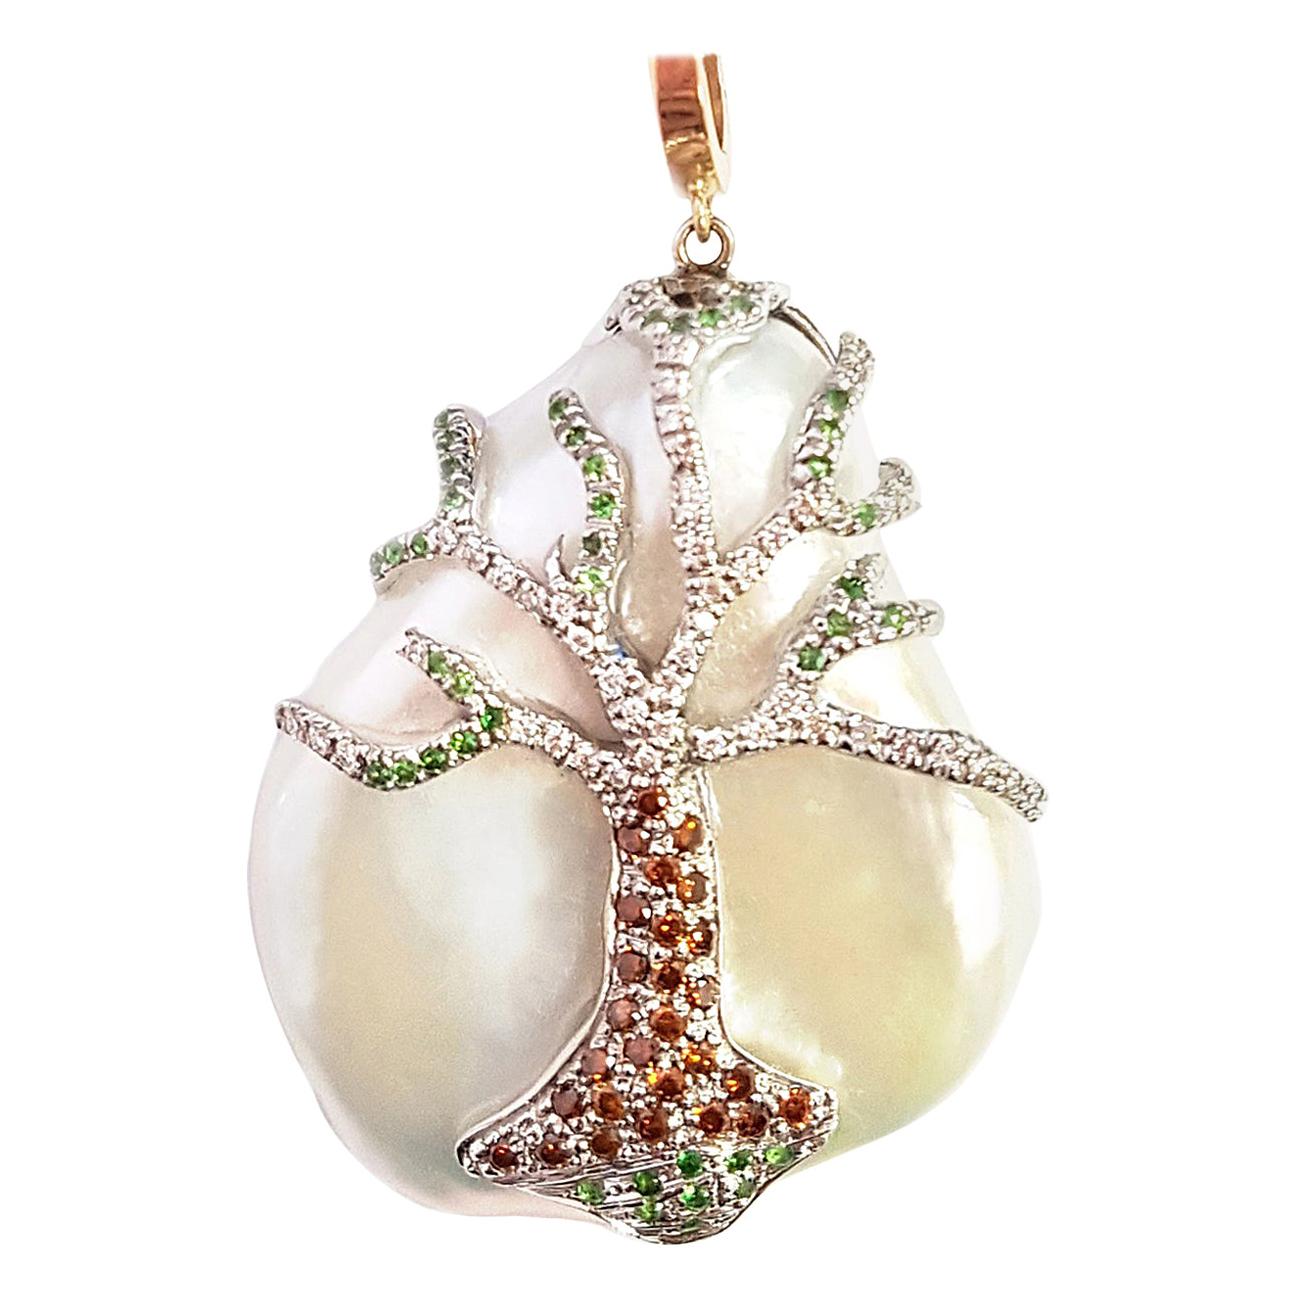 Behold the grandeur of this massive pearl pendant and white gold chain -- a true marvel of artistry and creativity. Crafted with exquisite skill, this pendant is a masterpiece that exudes opulence and elegance.

A large pearl serves as the canvas